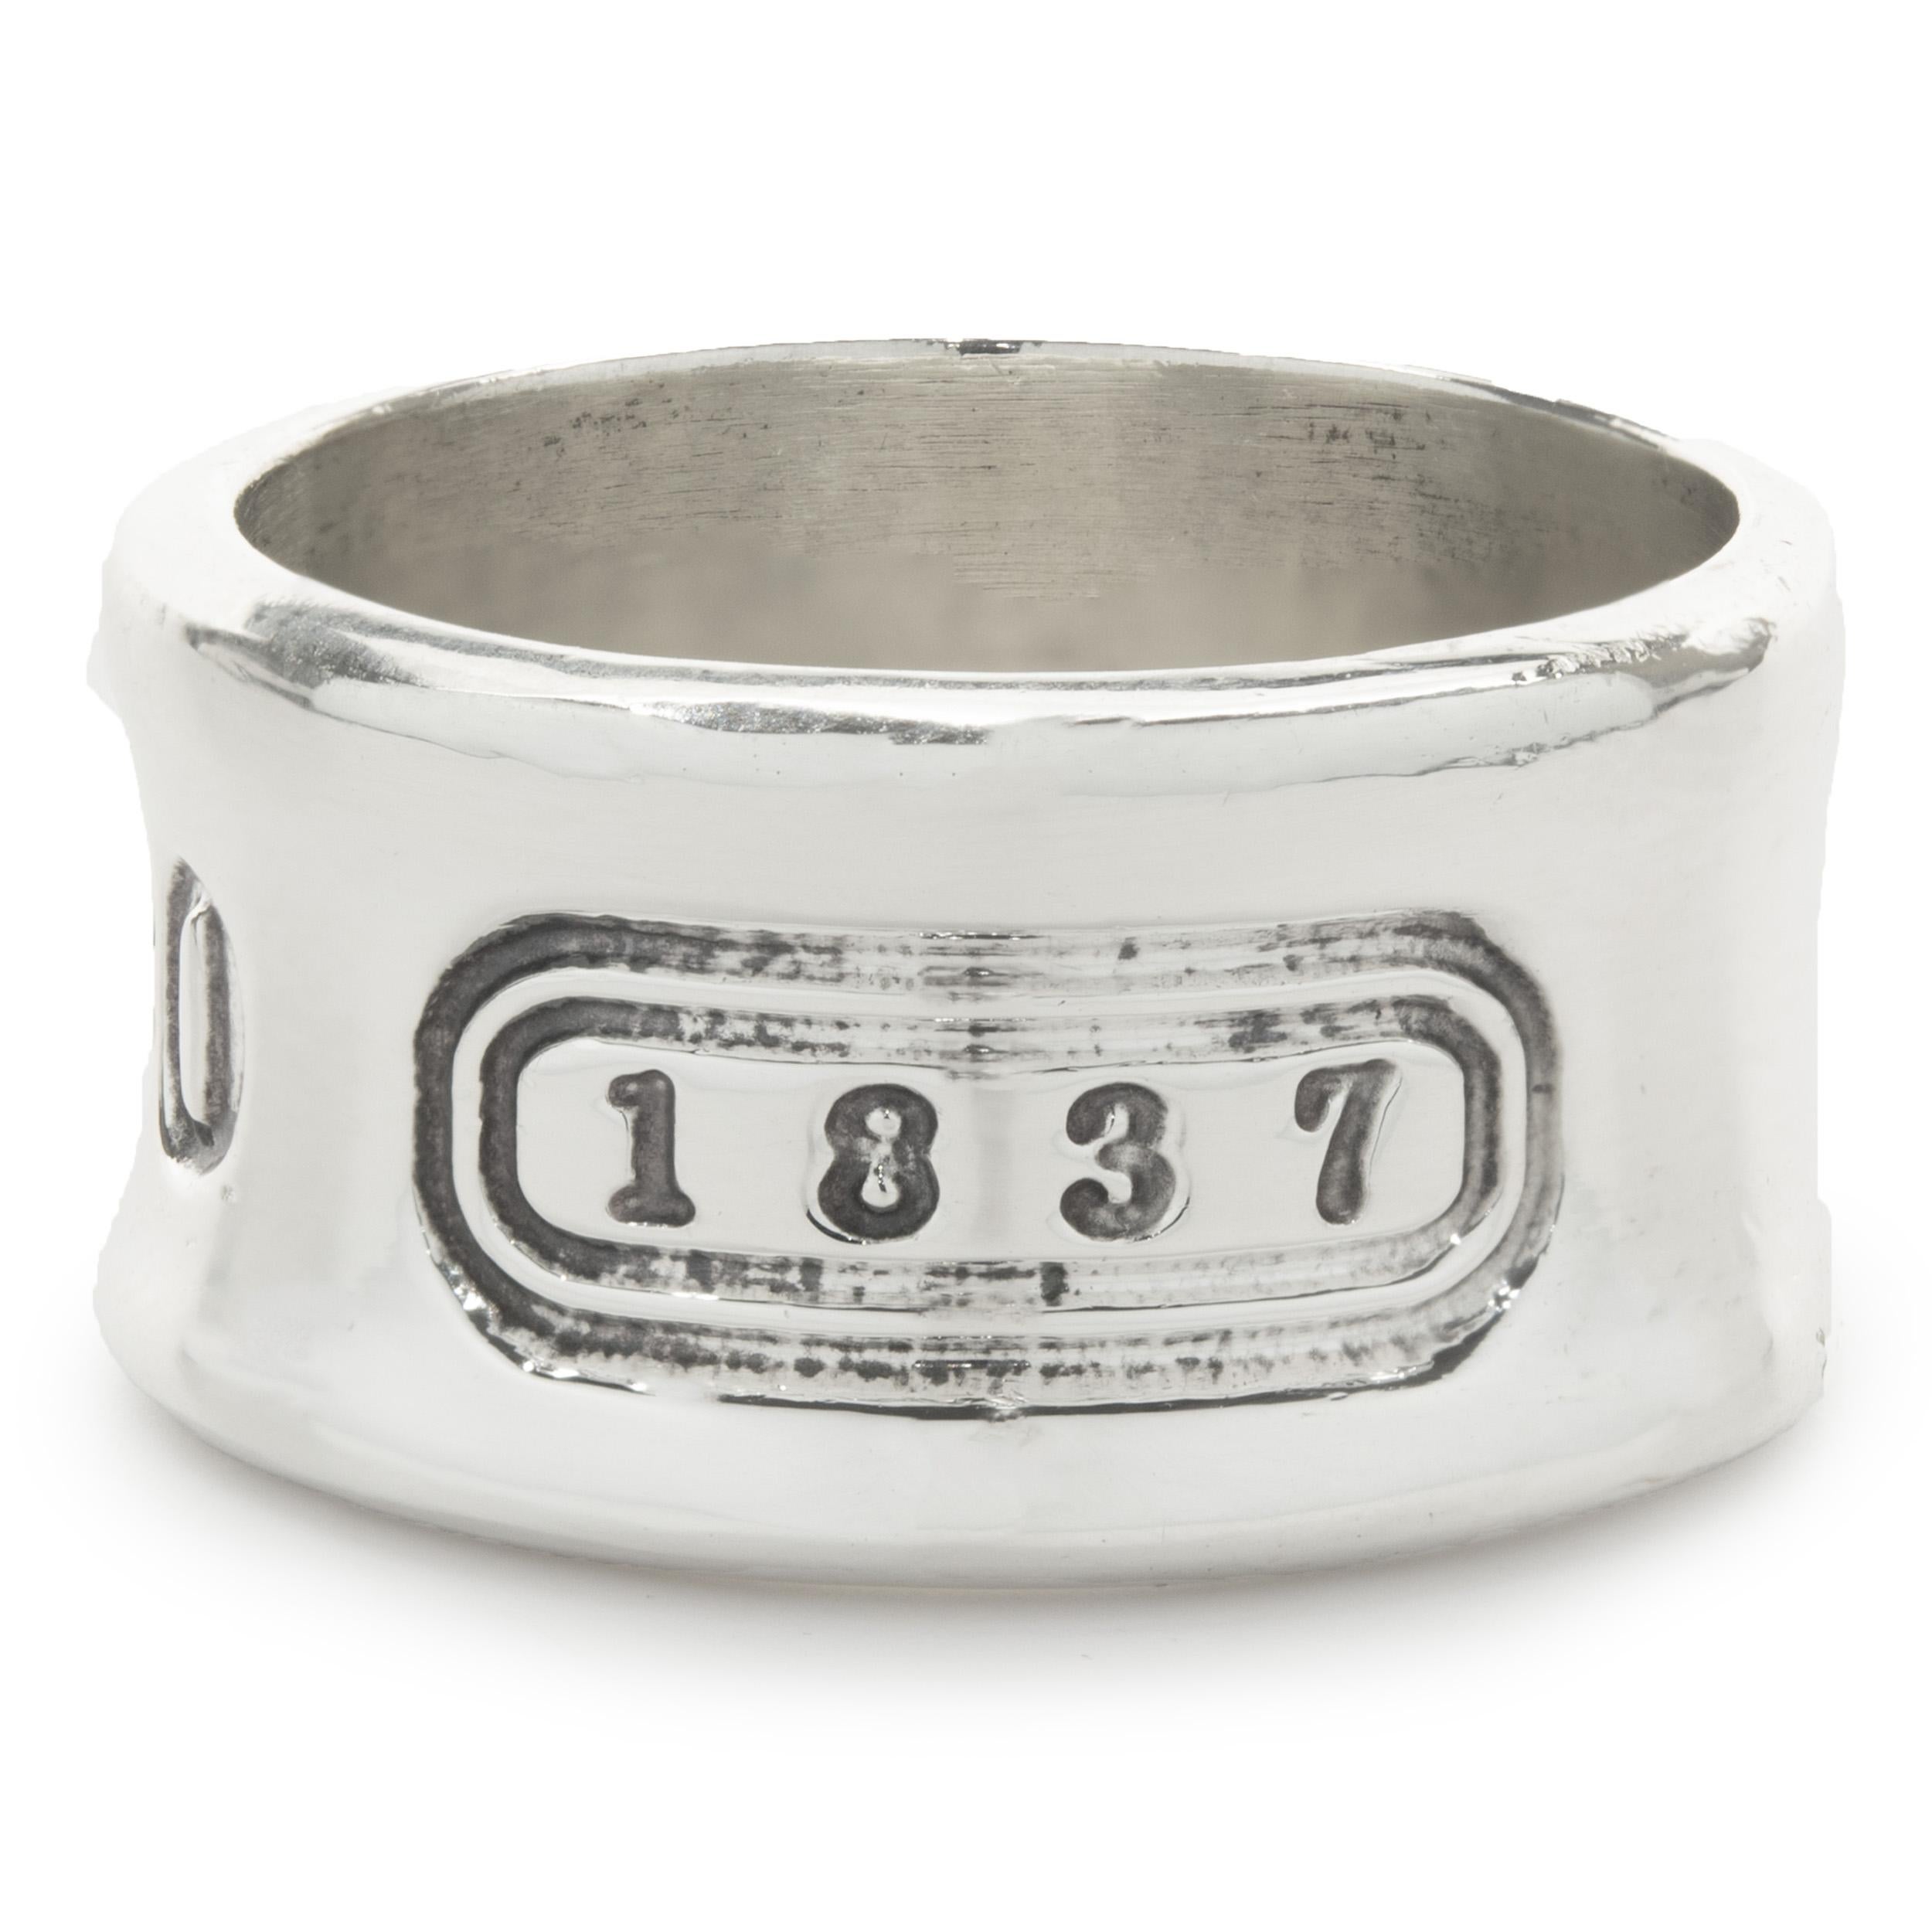 Designer: Tiffany & Co. 
Material: sterling silver
Dimensions: band top measures 11.30mm wide
Size: 8
Weight: 9.98 grams